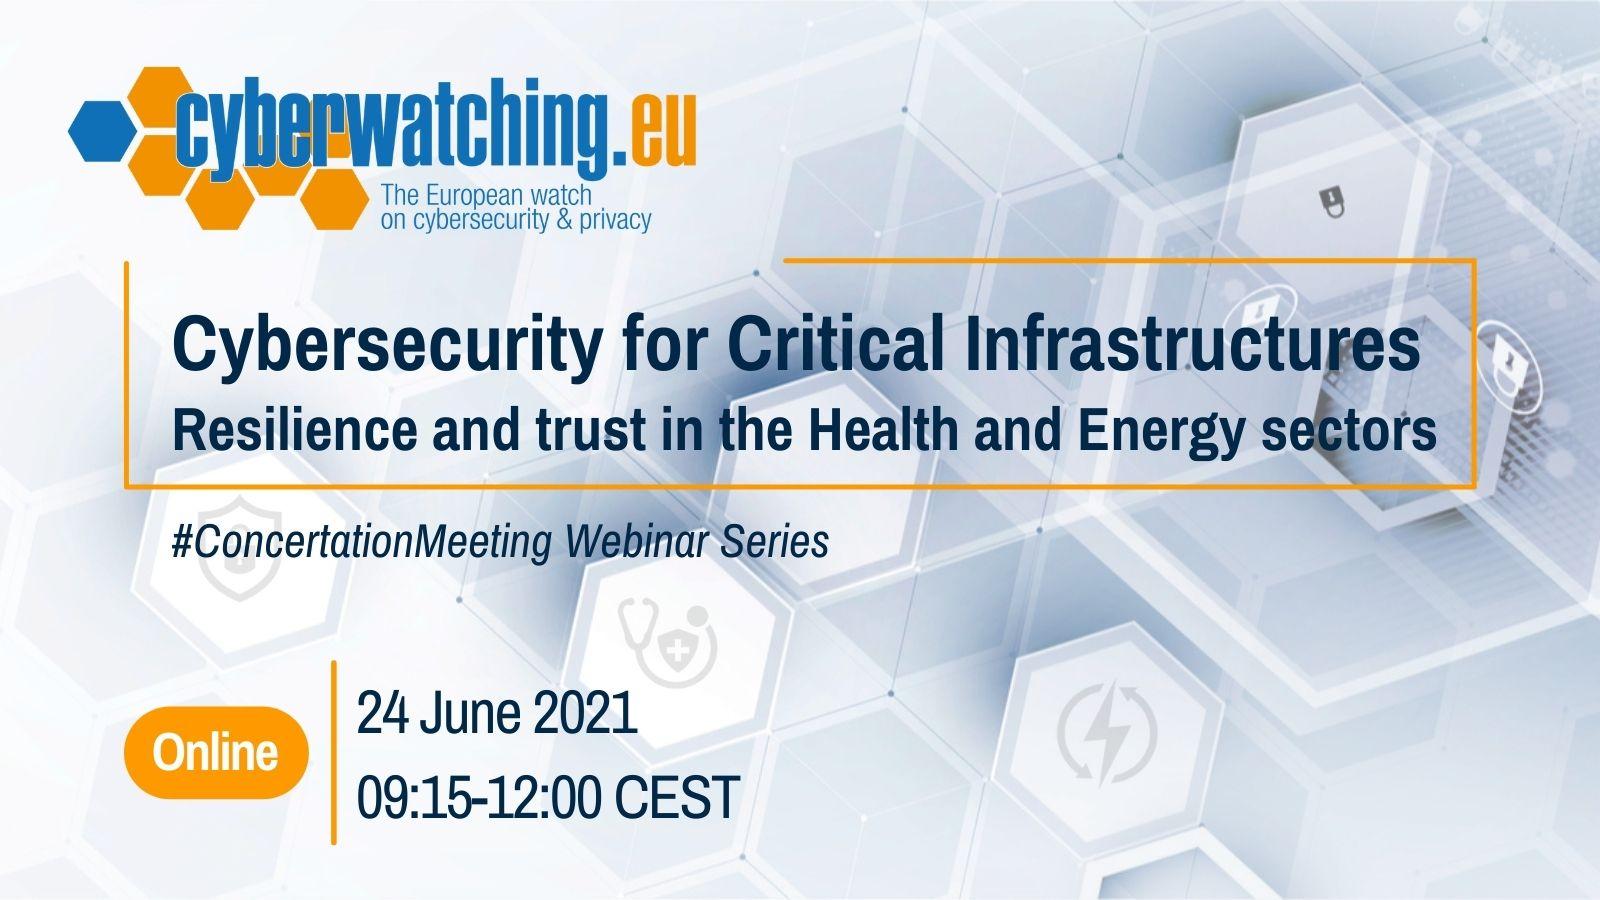 Cybersecurity for Critical Infrastructures - Resilience and trust in the Health and Energy sectors